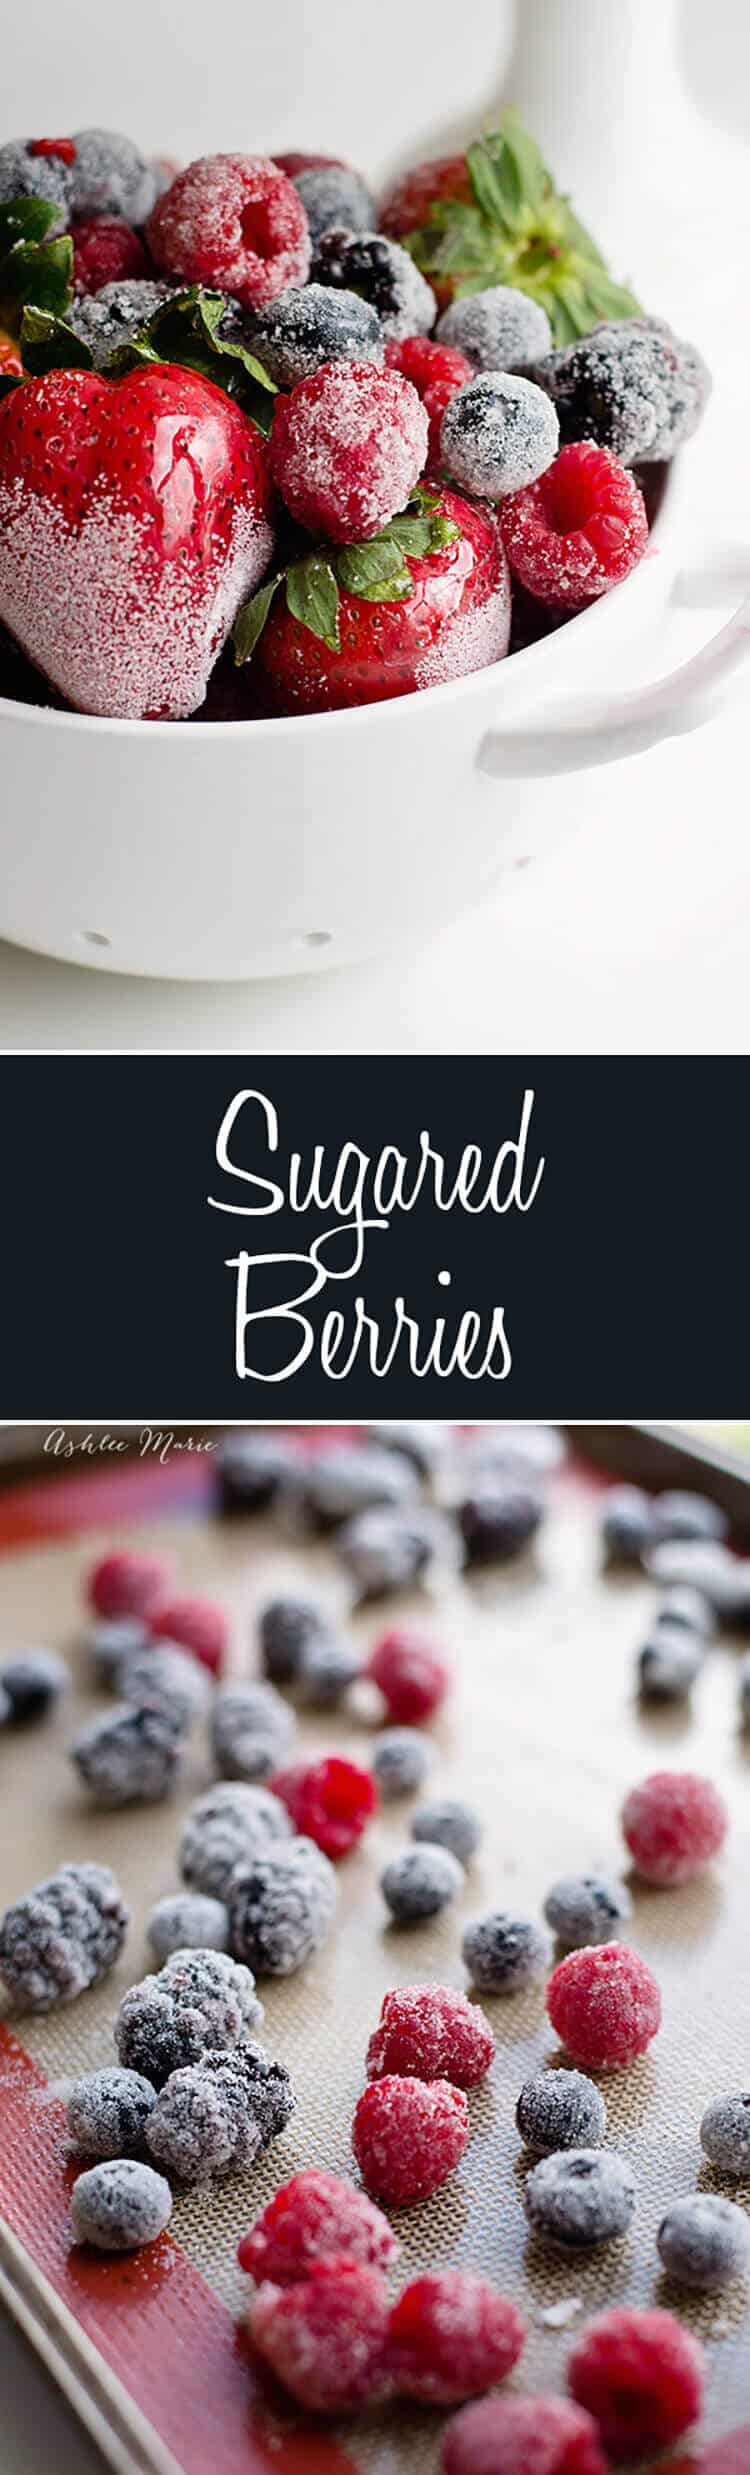 how to make your own sugared berries, a sweet crunch on the outside with a juicy inside plus a video tutorial